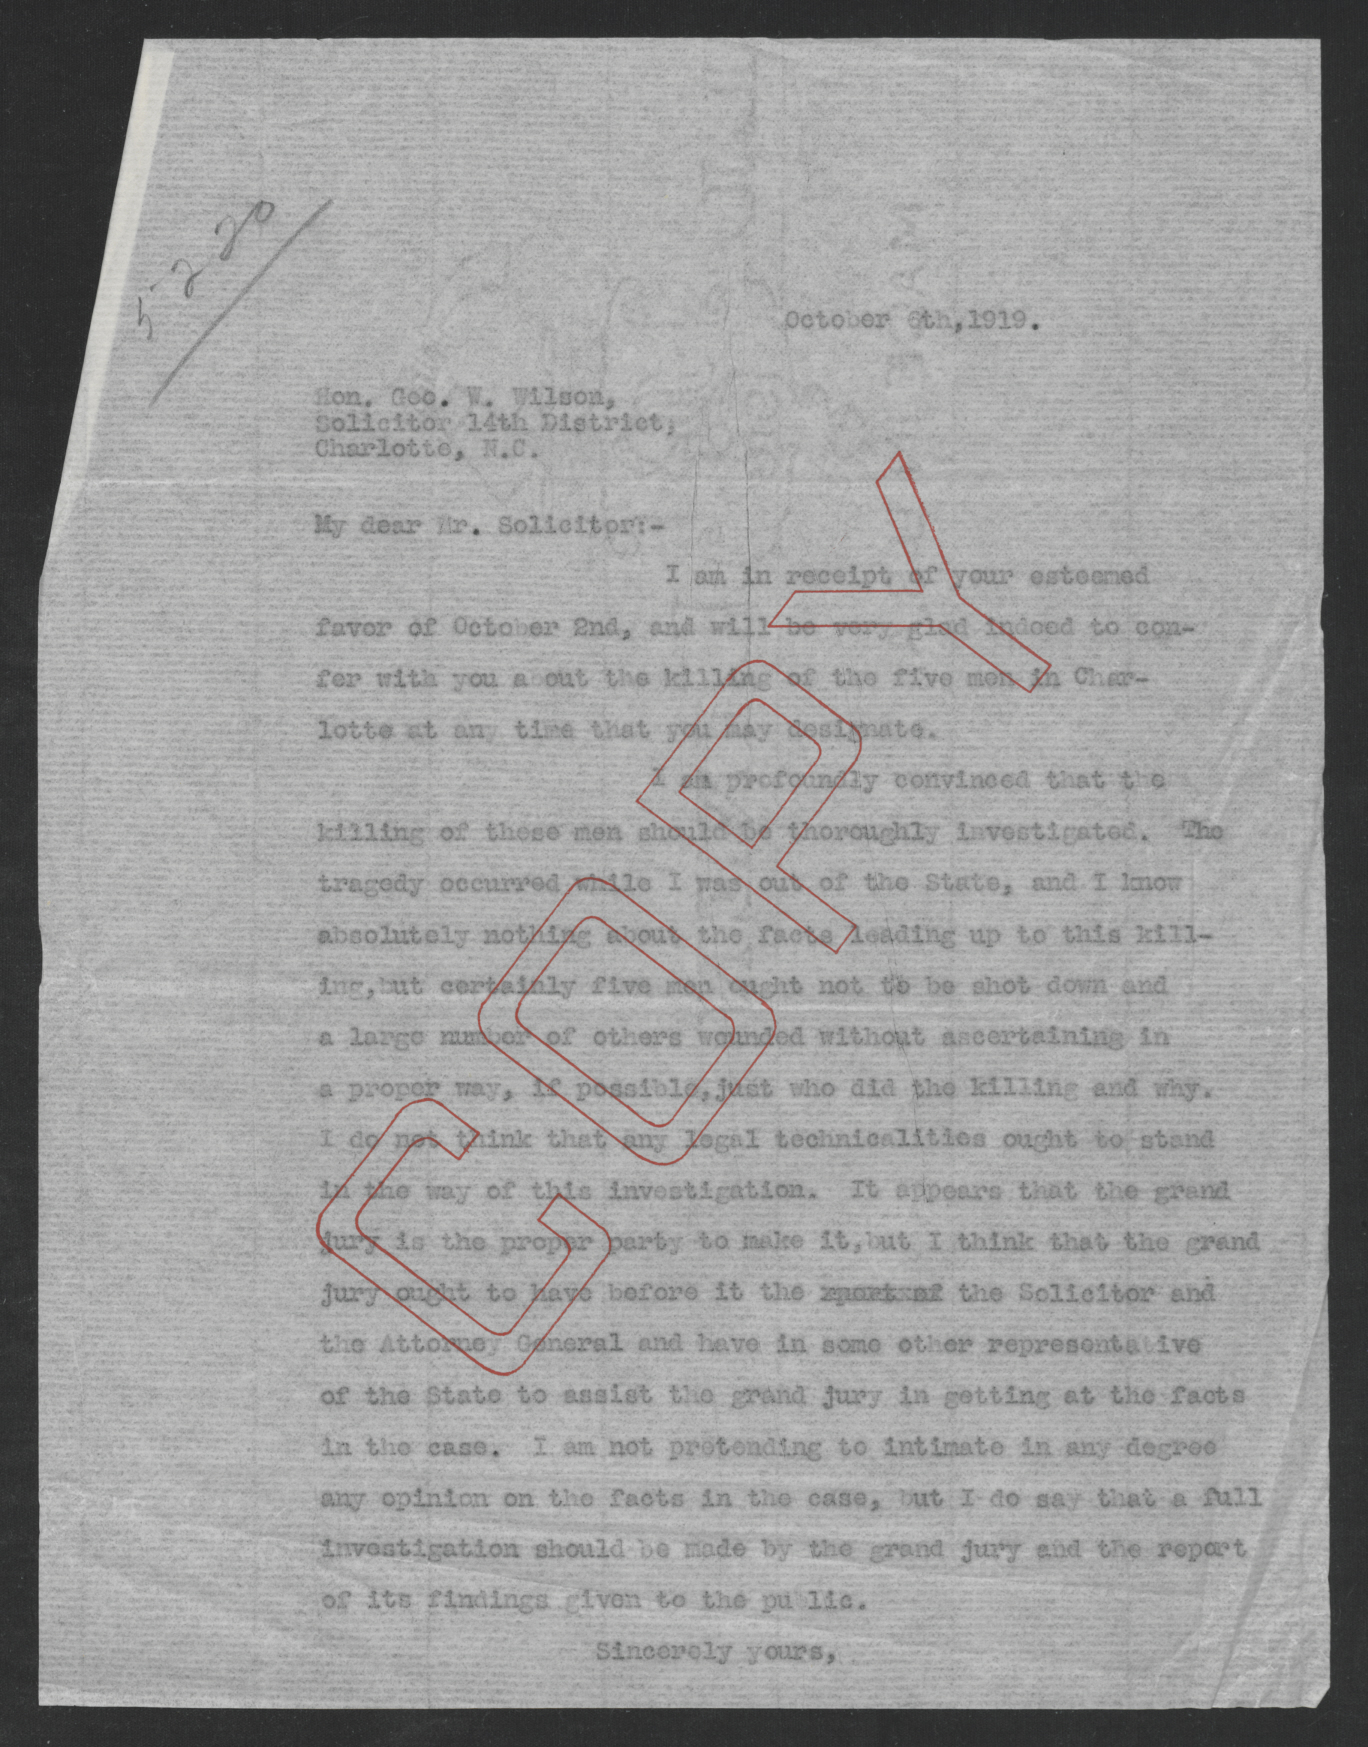 Letter from Thomas W. Bickett to George W. Wilson, October 6, 1919